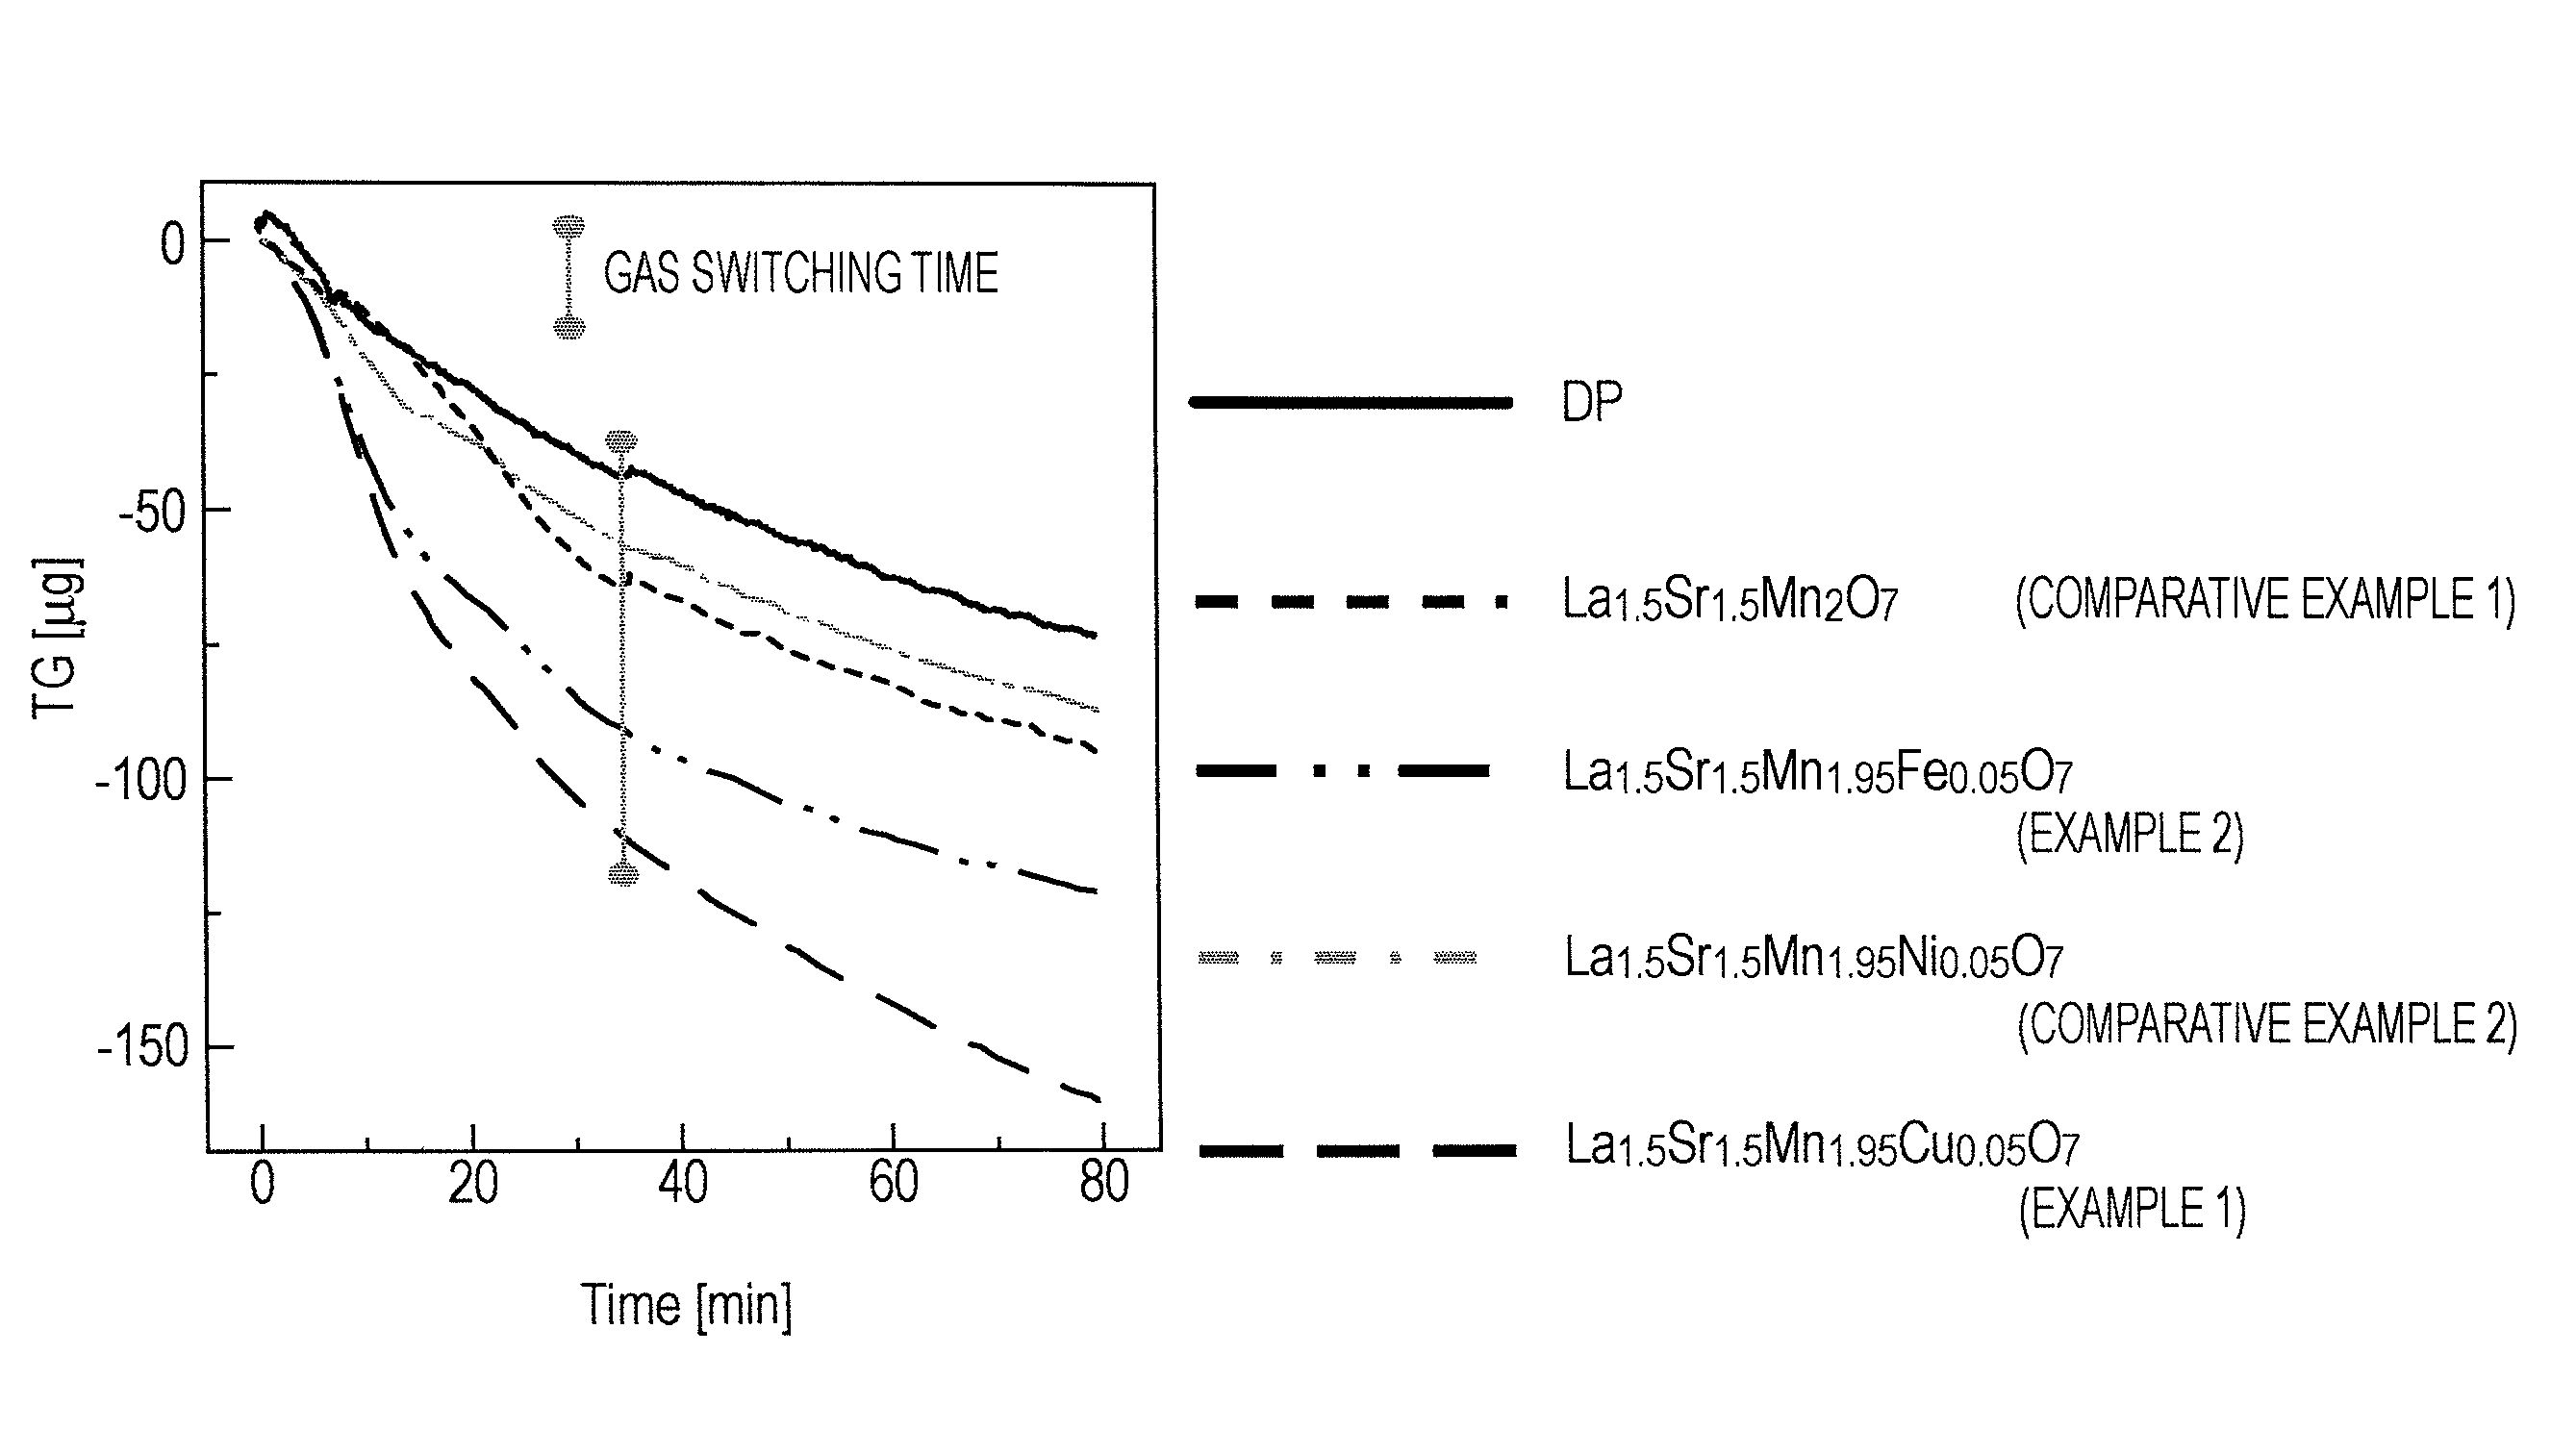 Layered composite oxide, oxidation catalyst, and diesel particulate filter